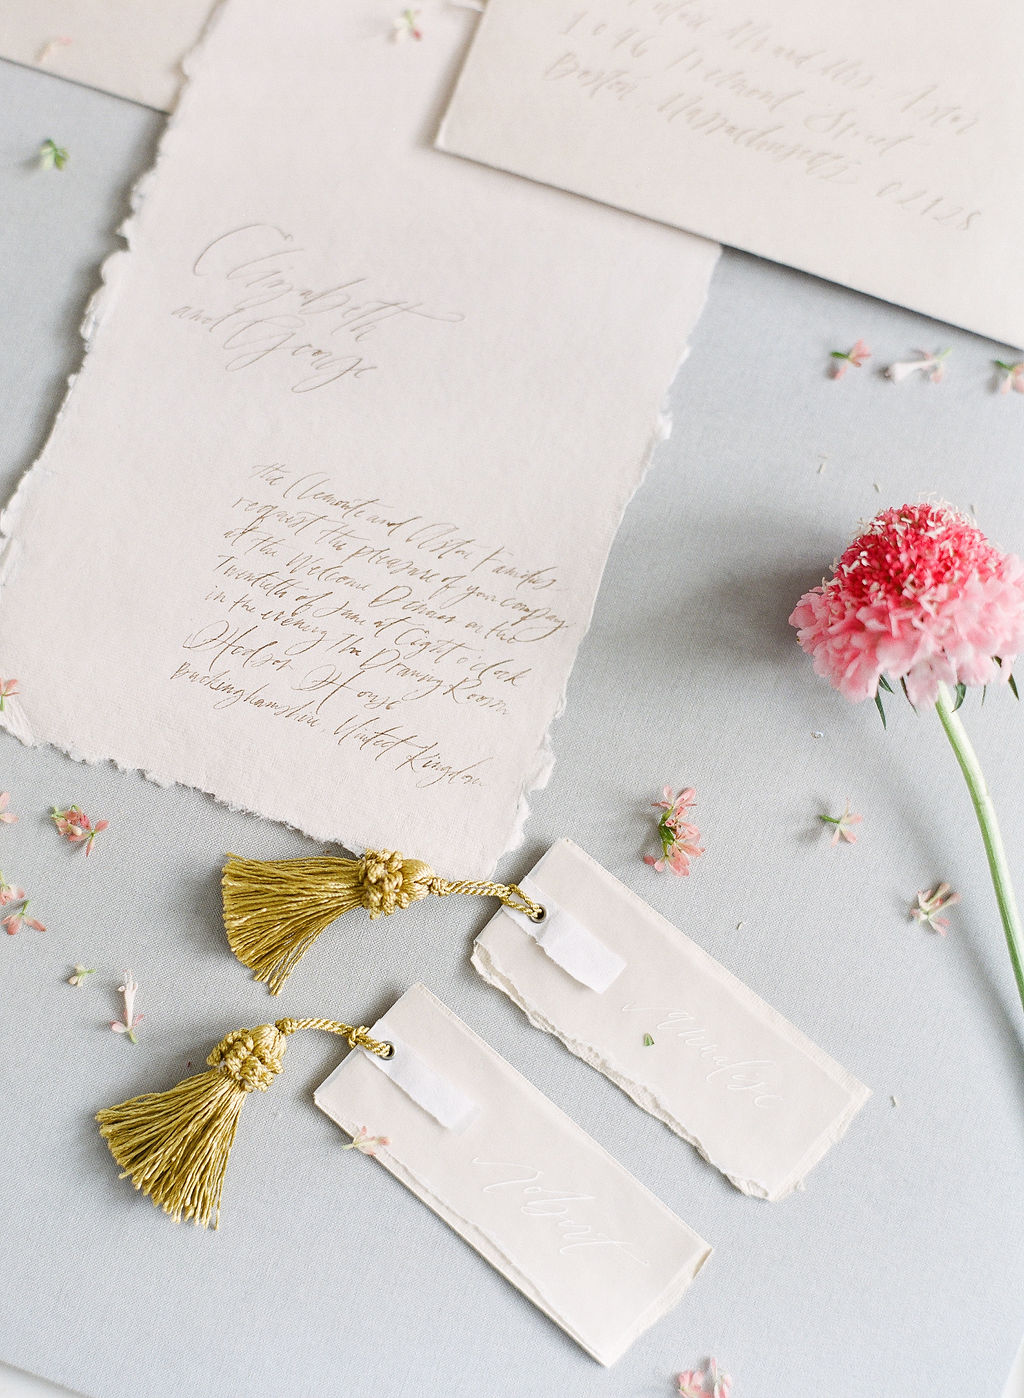 Wedding invites made from handmade paper with calligraphy